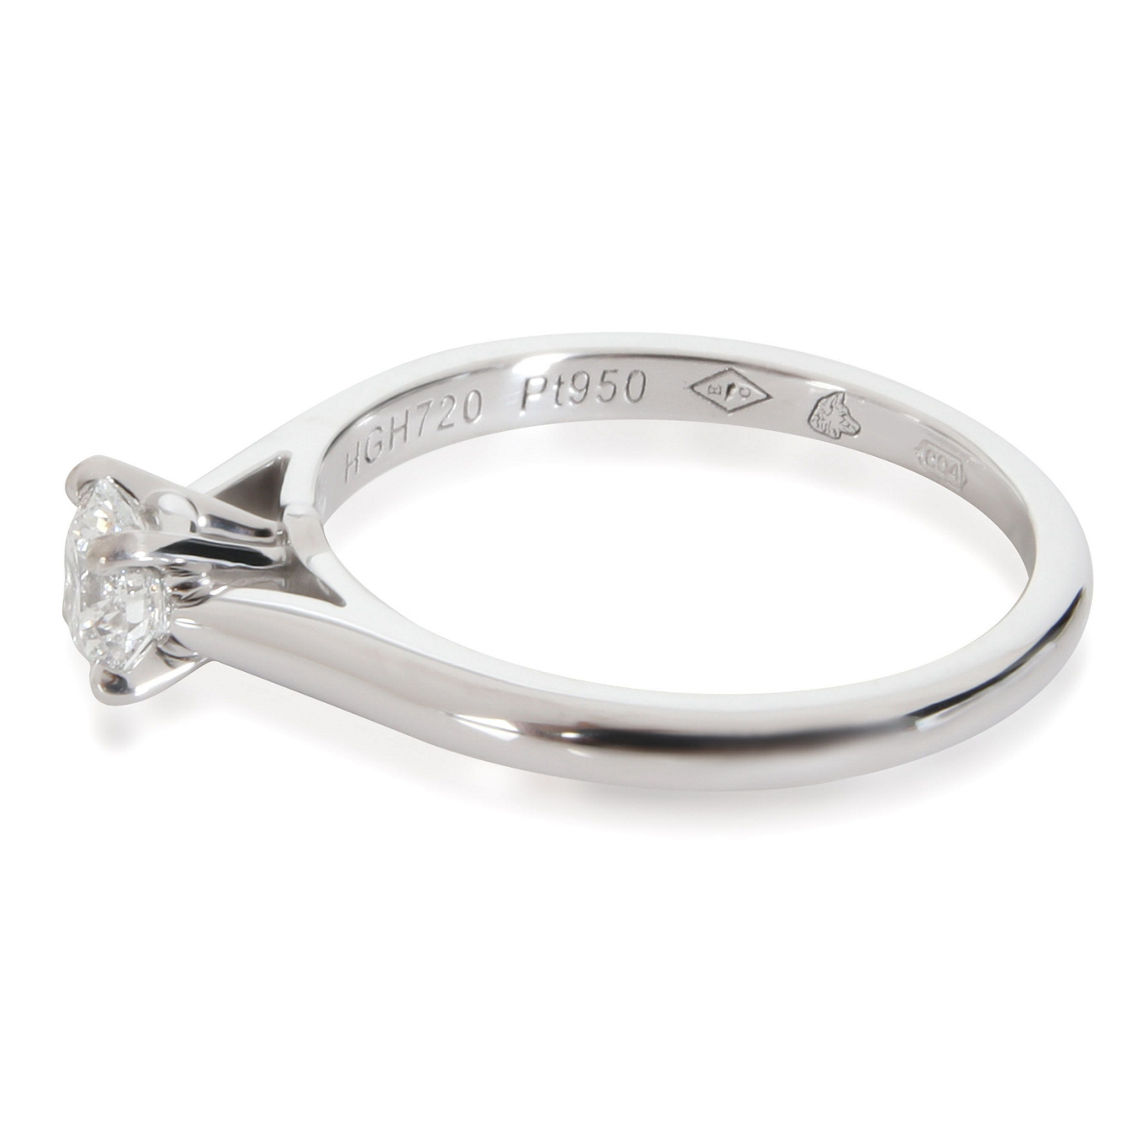 Cartier 1895 Solitaire Ring Pre-Owned - Image 2 of 2